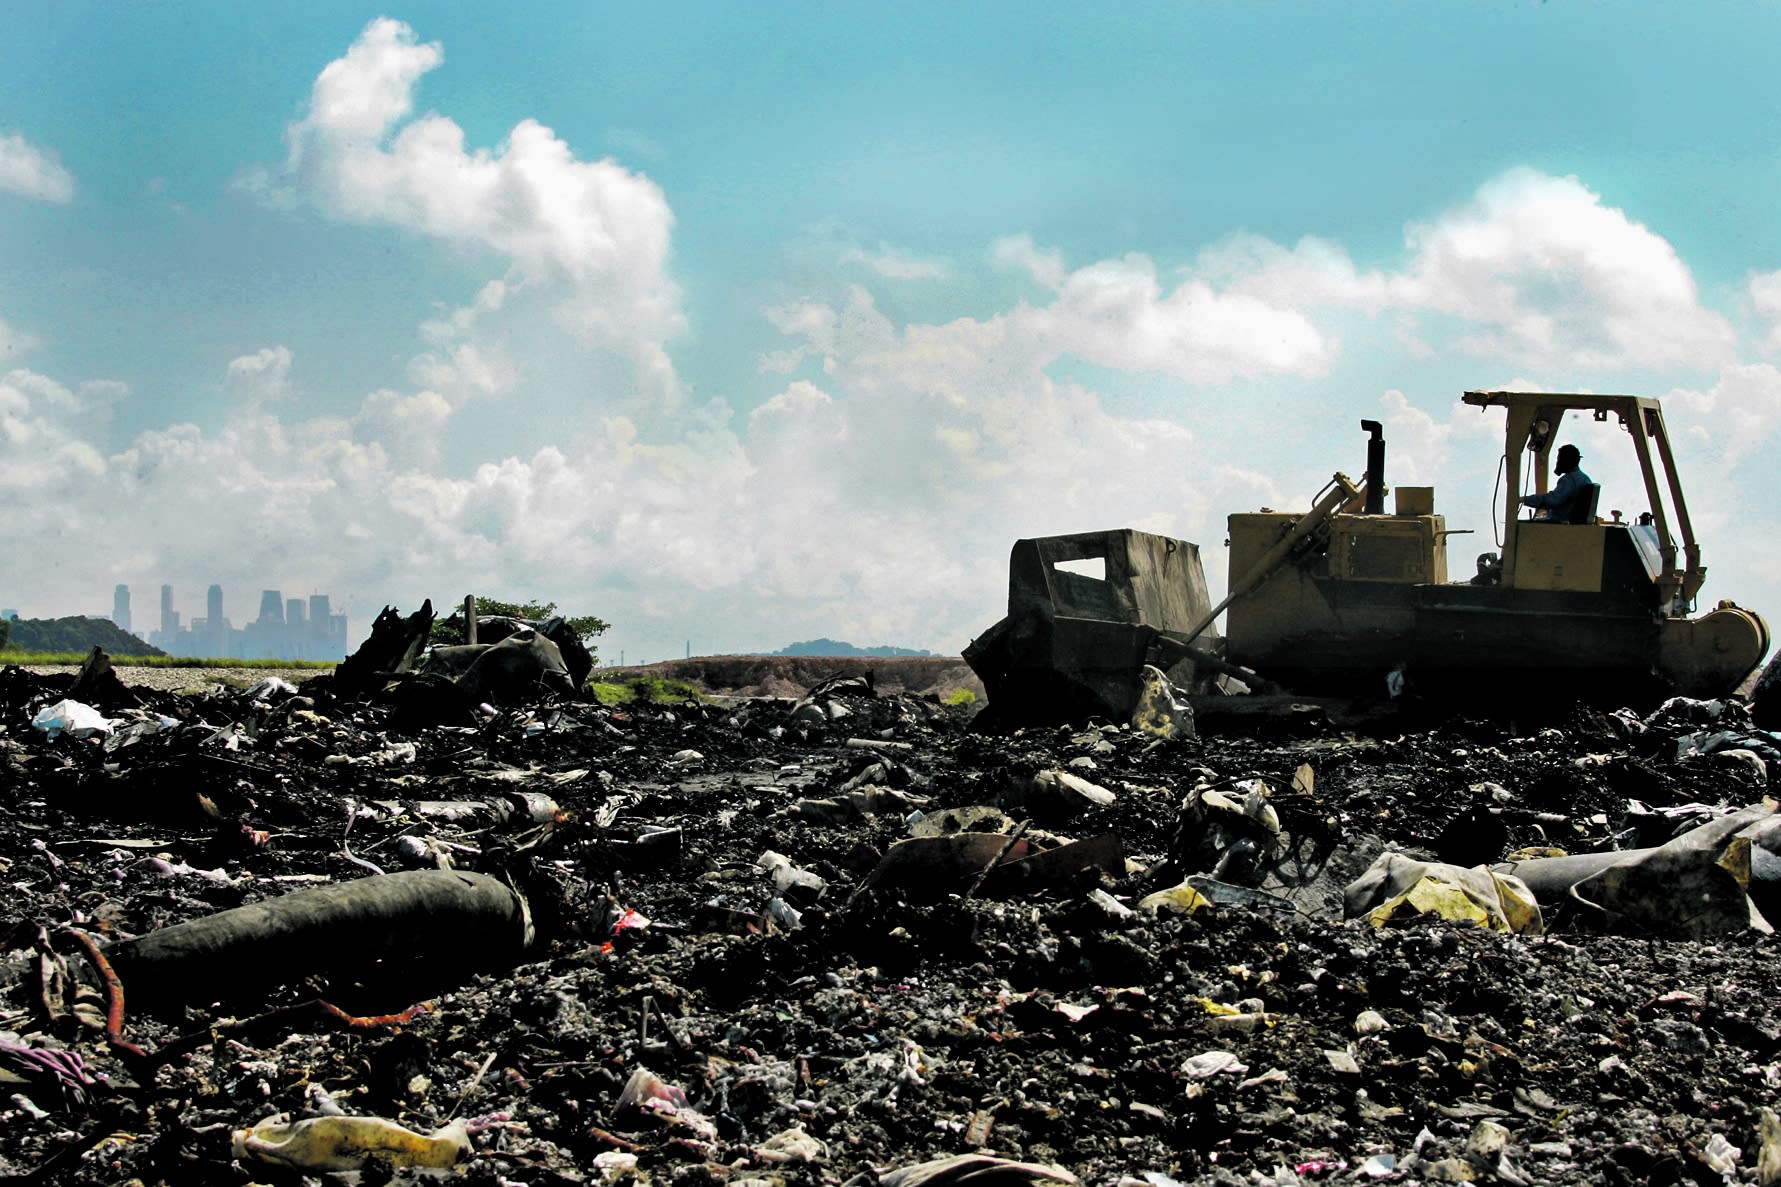 Bulldozers and compactors are used to level and compact the waste at a landfill cell at the Semakau Landfill, which is Singapore's only landfill for waste disposal. 